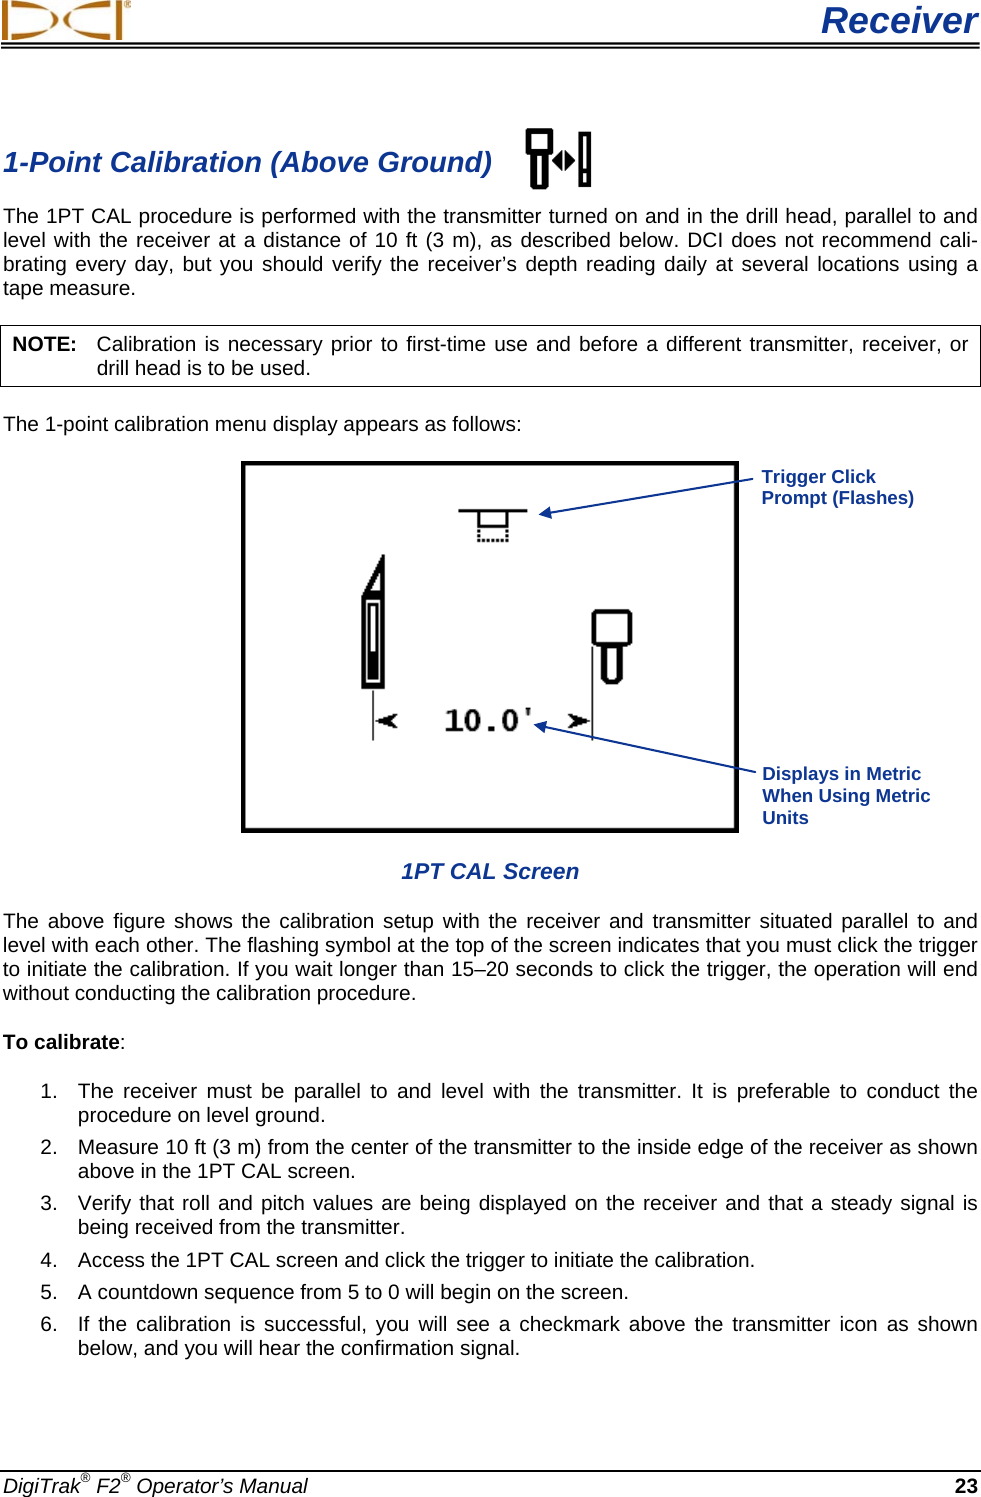  Receiver DigiTrak® F2® Operator’s Manual 23 1-Point Calibration (Above Ground) The 1PT CAL procedure is performed with the transmitter turned on and in the drill head, parallel to and level with the receiver at a distance of 10 ft (3 m), as described below. DCI does not recommend cali-brating every day, but you should verify the receiver’s depth reading daily at several locations using a tape measure. NOTE:   Calibration is necessary prior to first-time use and before a different transmitter, receiver, or drill head is to be used. The 1-point calibration menu display appears as follows:  1PT CAL Screen The above figure shows the calibration setup with the receiver and transmitter situated parallel to and level with each other. The flashing symbol at the top of the screen indicates that you must click the trigger to initiate the calibration. If you wait longer than 15–20 seconds to click the trigger, the operation will end without conducting the calibration procedure. To calibrate:  1.  The receiver must be parallel to and level with the transmitter.  It is preferable to conduct the procedure on level ground. 2. Measure 10 ft (3 m) from the center of the transmitter to the inside edge of the receiver as shown above in the 1PT CAL screen. 3. Verify that roll and pitch values are being displayed on the receiver and that a steady signal is being received from the transmitter.  4. Access the 1PT CAL screen and click the trigger to initiate the calibration. 5. A countdown sequence from 5 to 0 will begin on the screen. 6. If the calibration is successful, you will  see a checkmark above the transmitter icon as shown below, and you will hear the confirmation signal.   Trigger Click Prompt (Flashes) Displays in Metric When Using Metric Units  